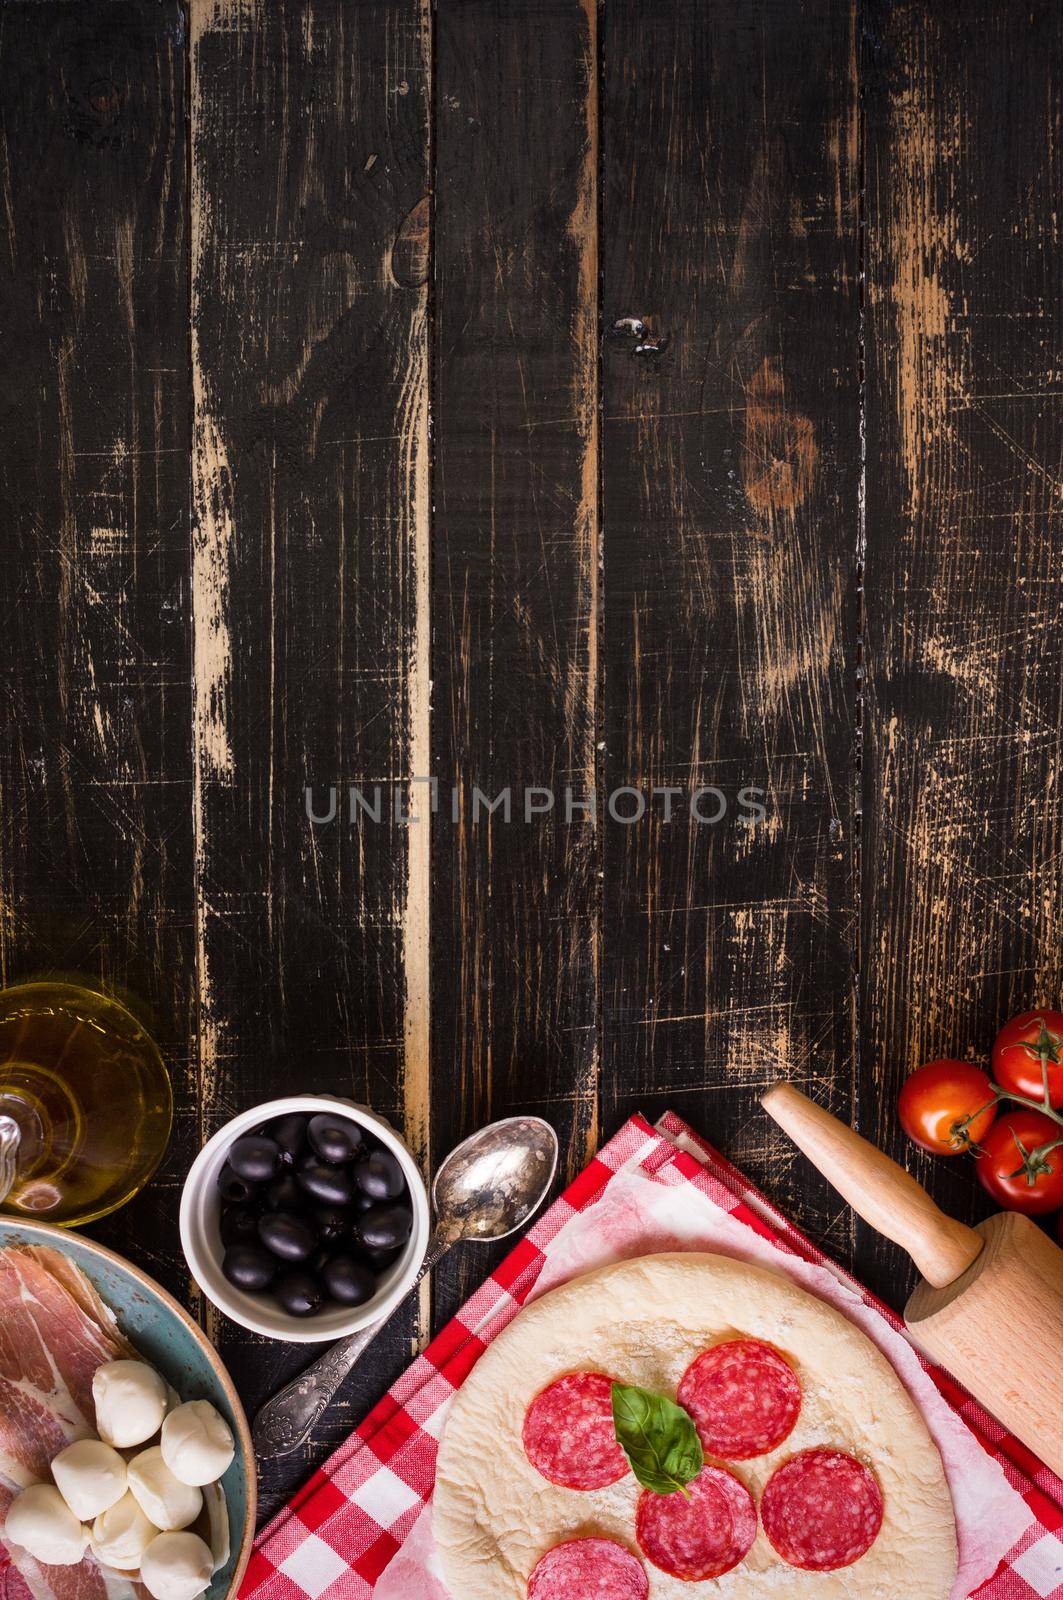 Pizza making background. Ingredients for making pizza. Space for text. Pizza dough, flour, cheese, mozzarella, tomatoes, basil, pepperoni, olives and rolling pin over black wooden background. Top view